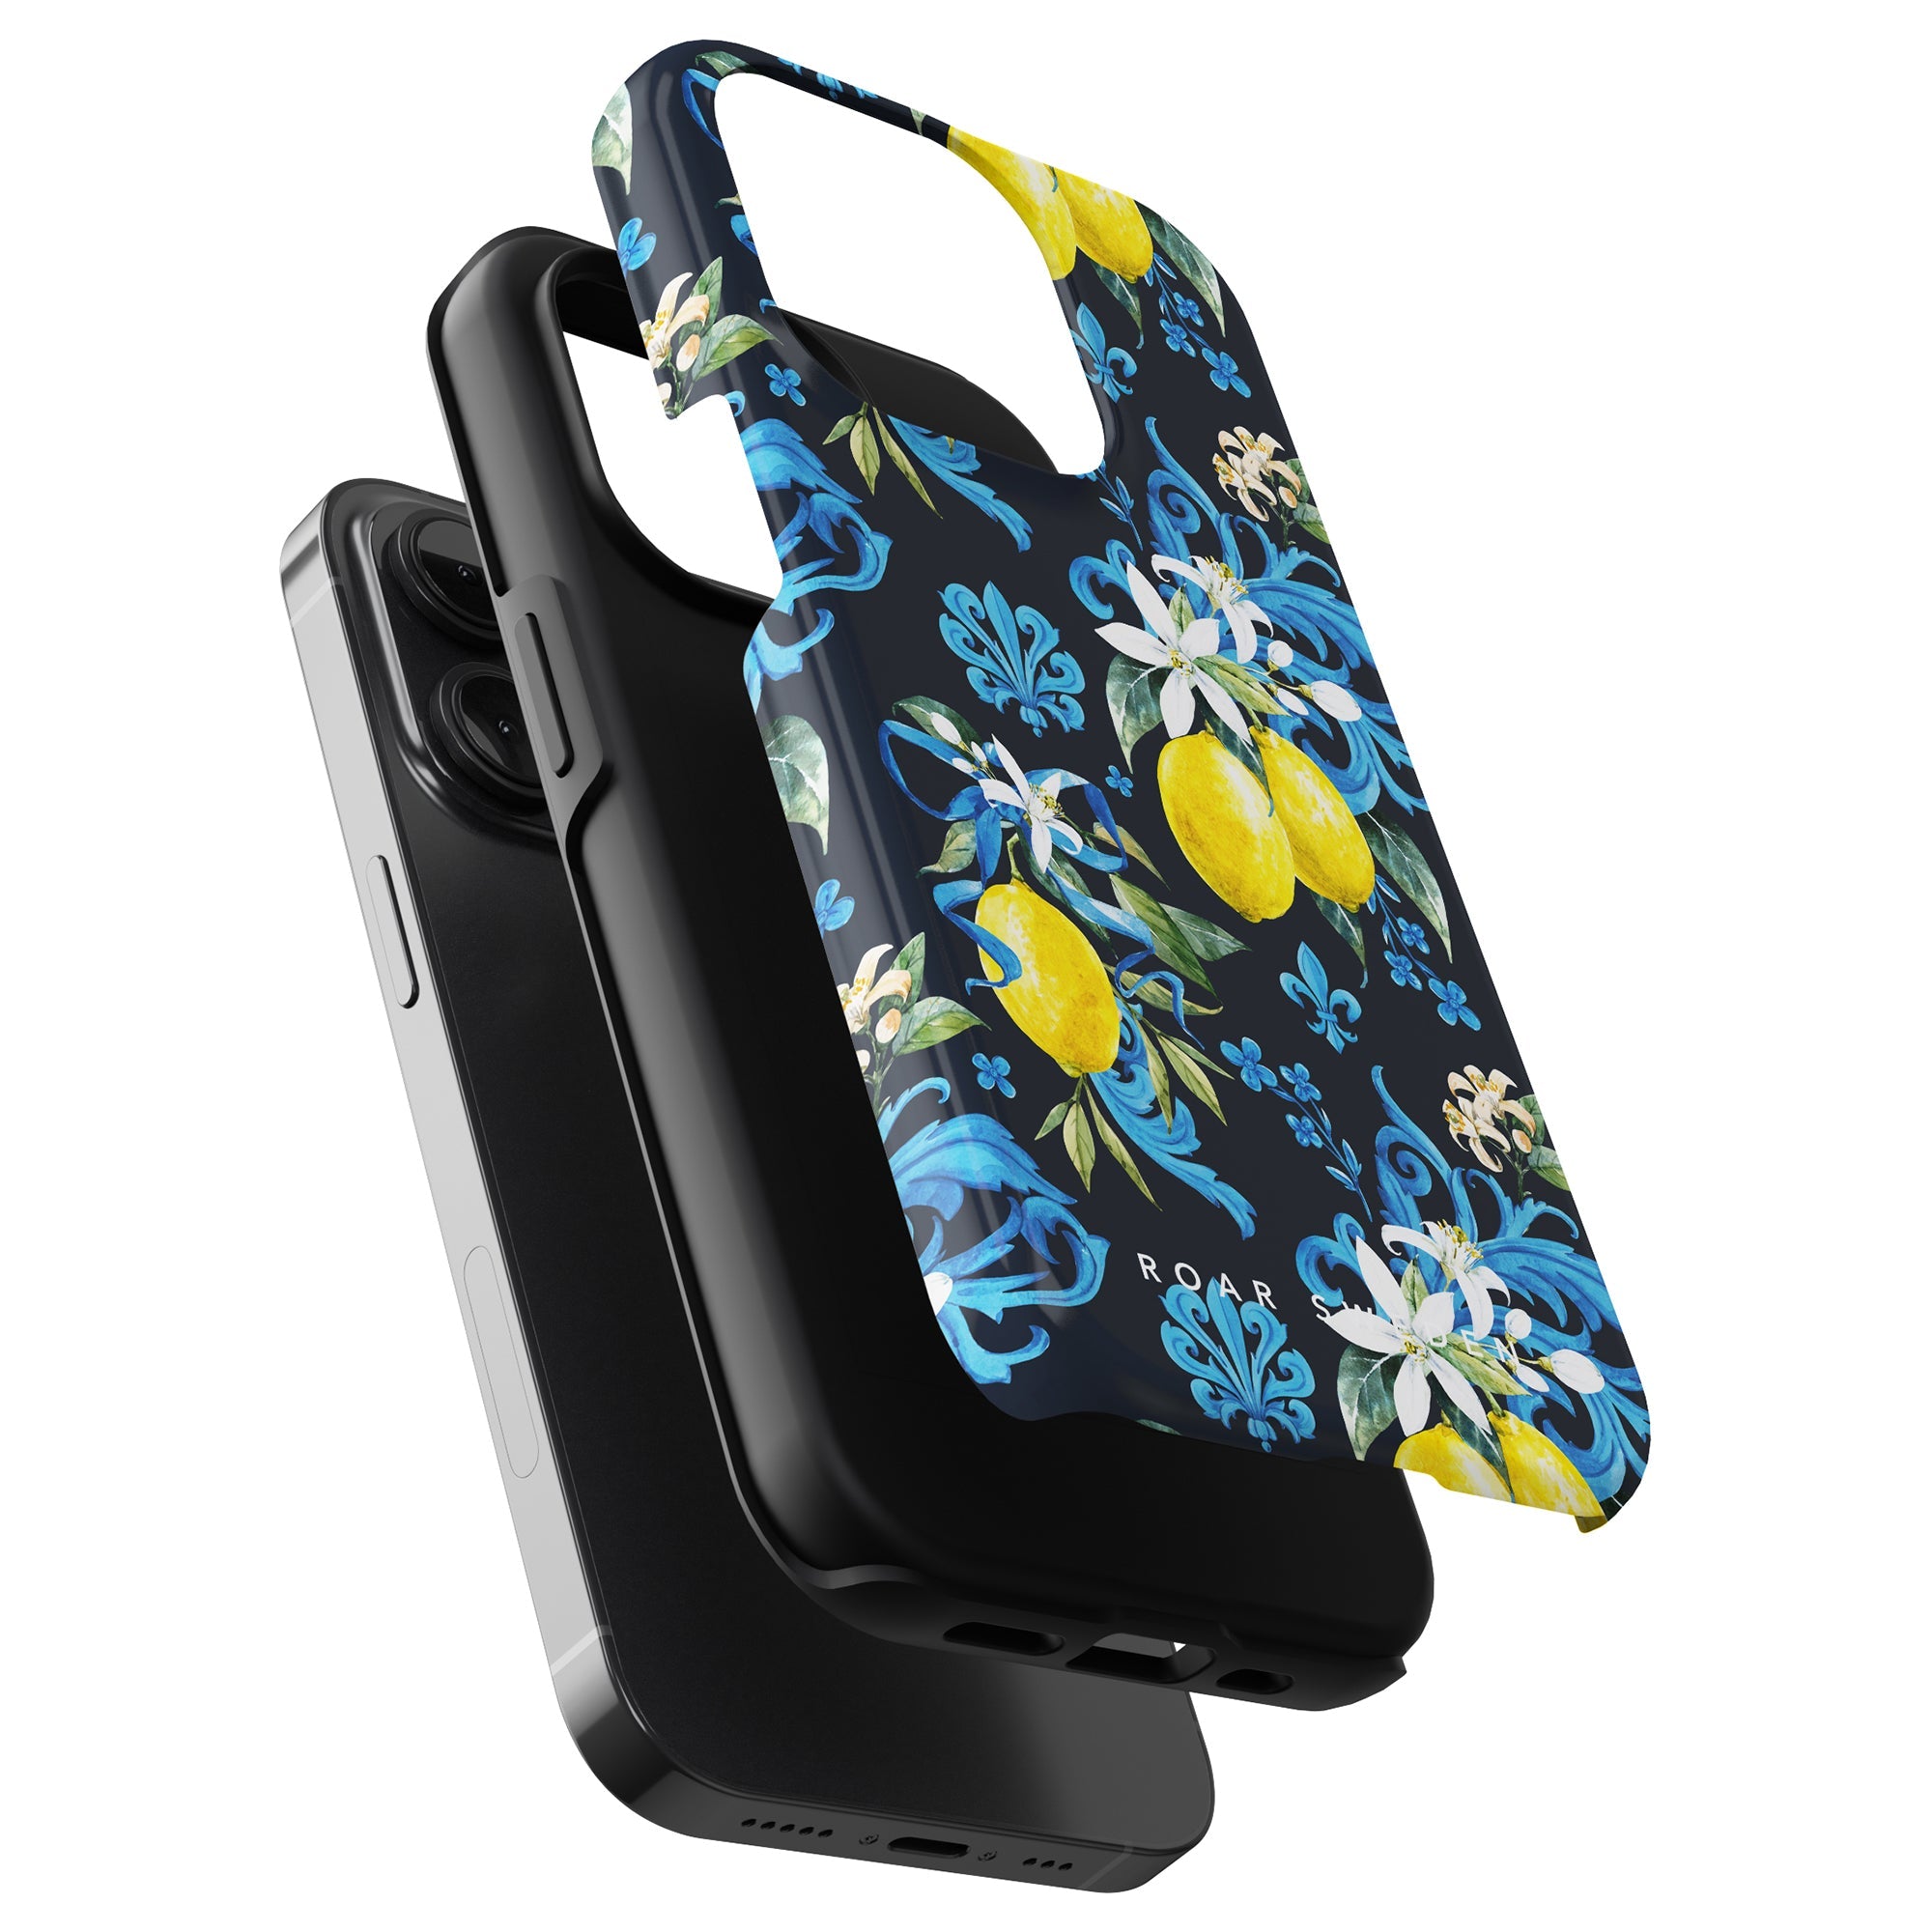 Toscana - Tough case with a floral patterned mobilskal featuring lemons.